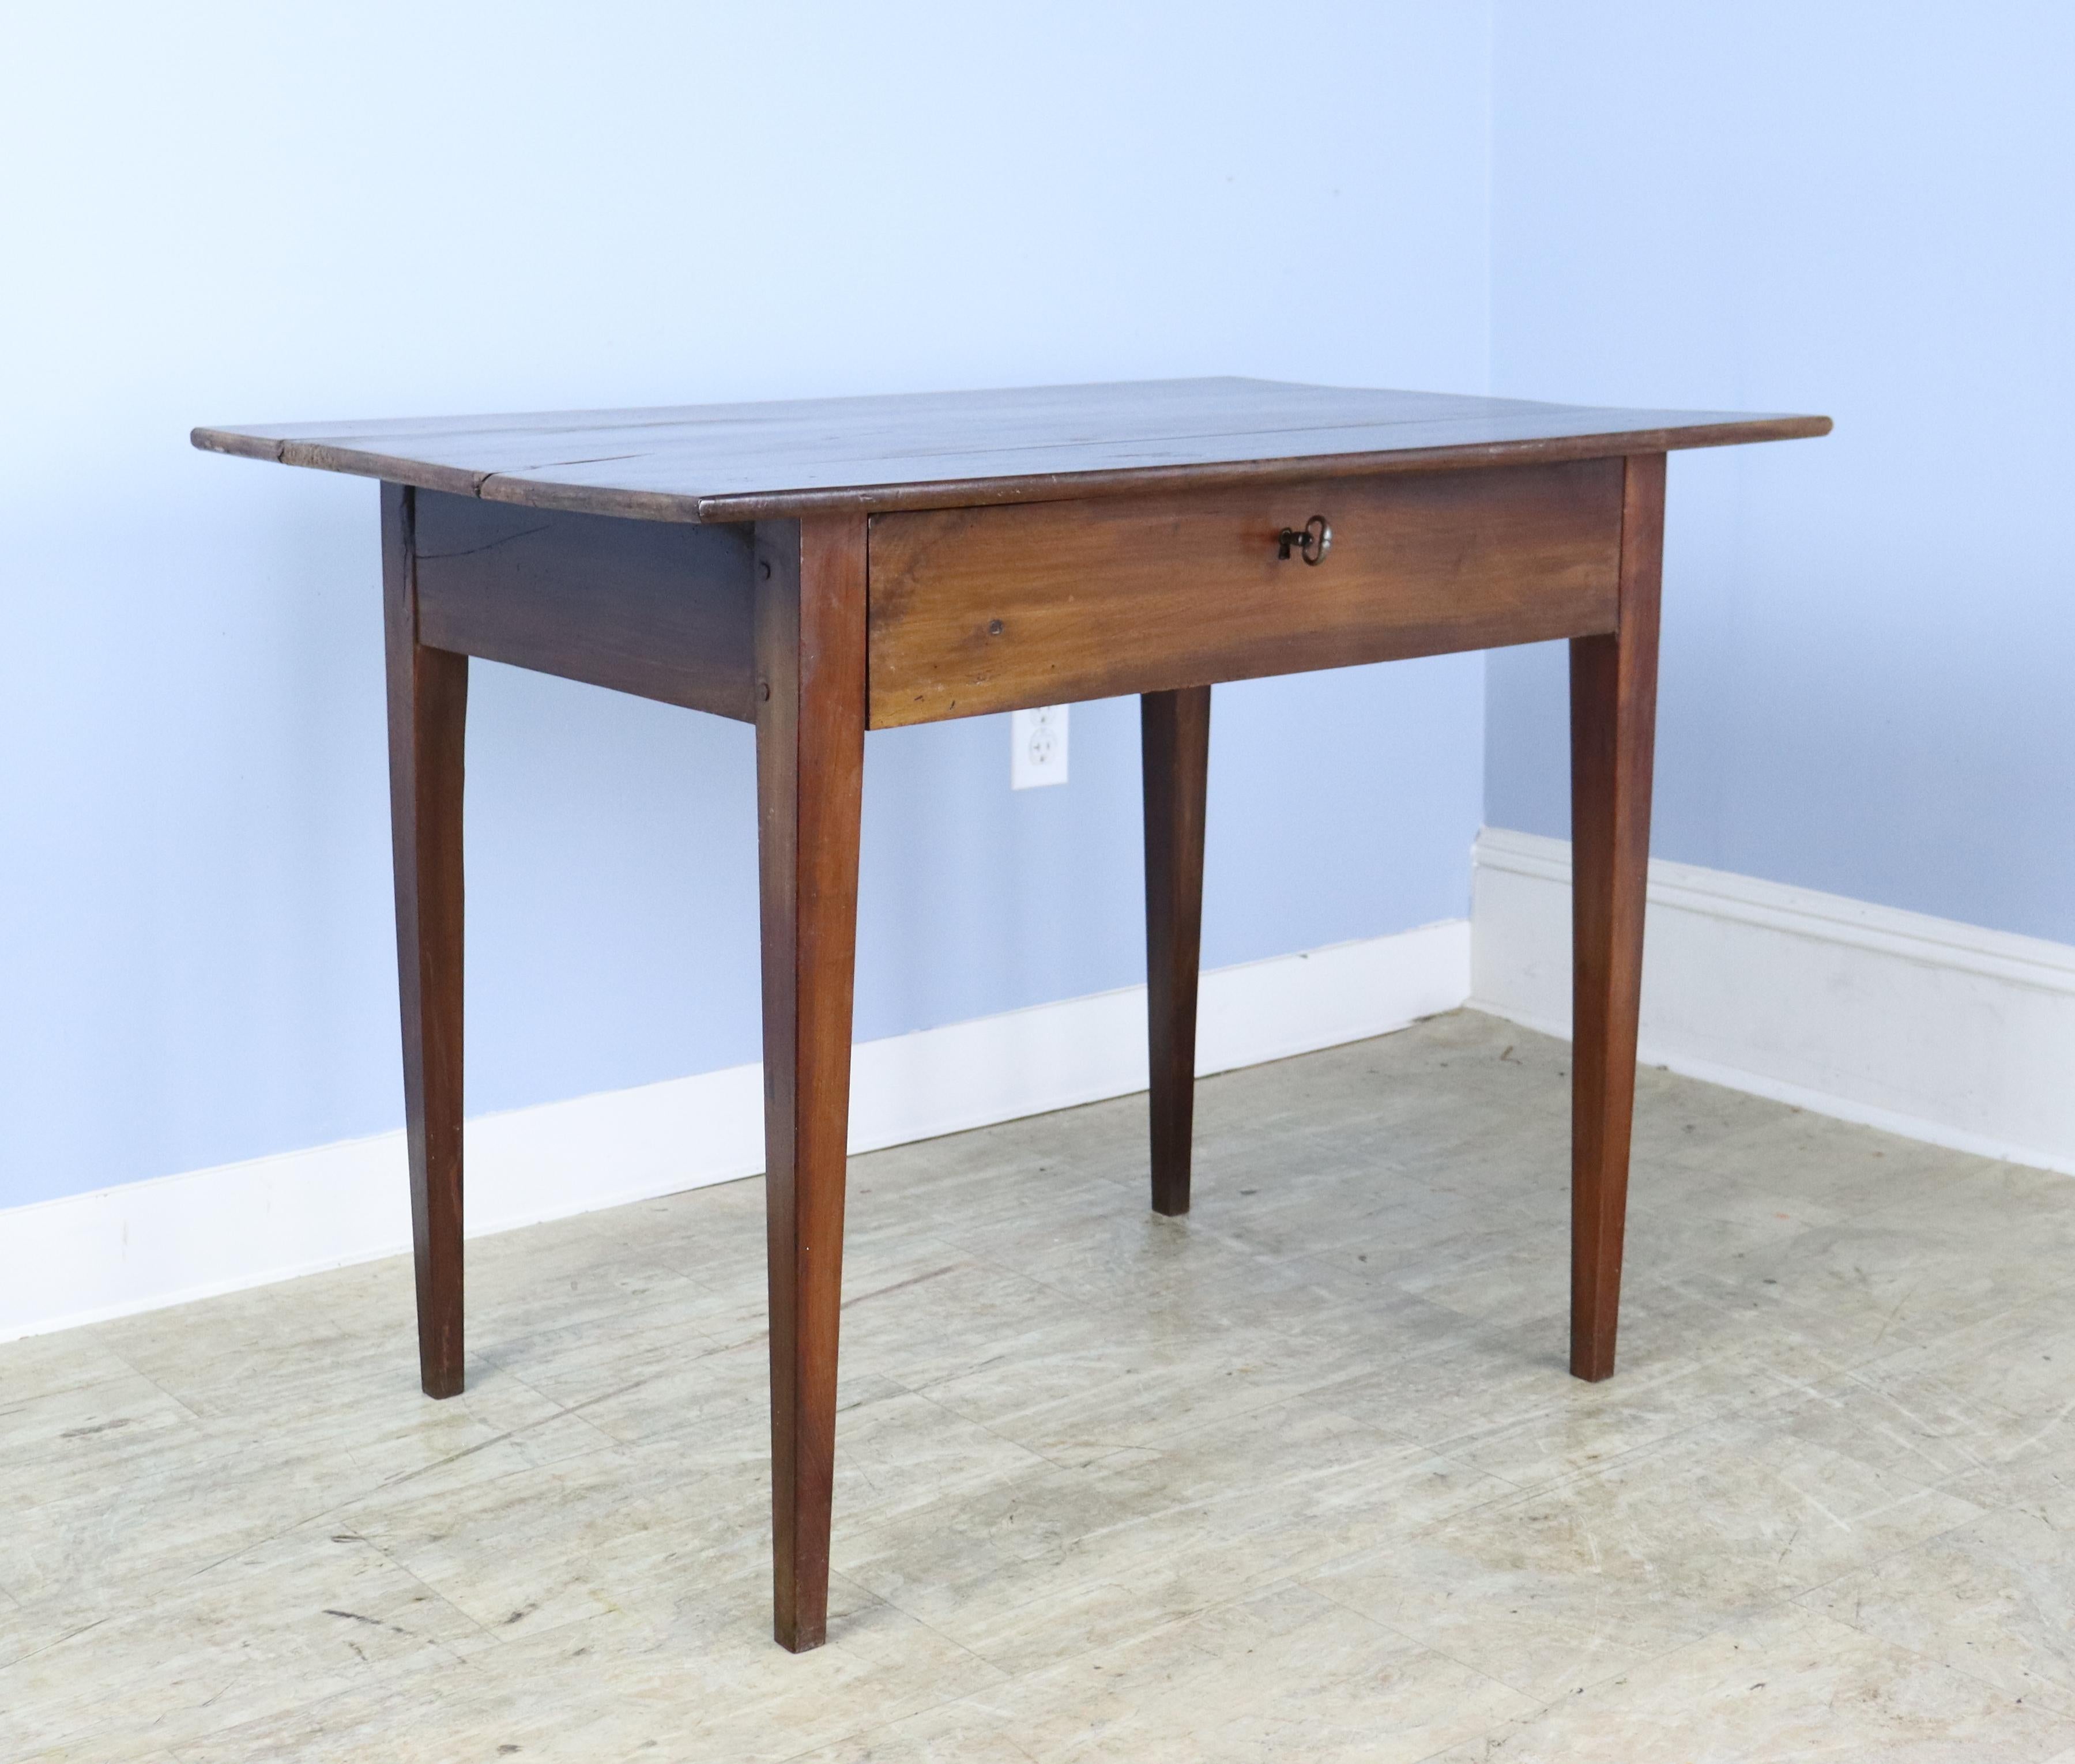 An elegant fruitwood side table with wonderful grain and color and a graceful thin top. Good tapered legs, pegged at the apron. The key does not turn in the lock but is attractive and useful as a drawer pull. Although this piece is generously